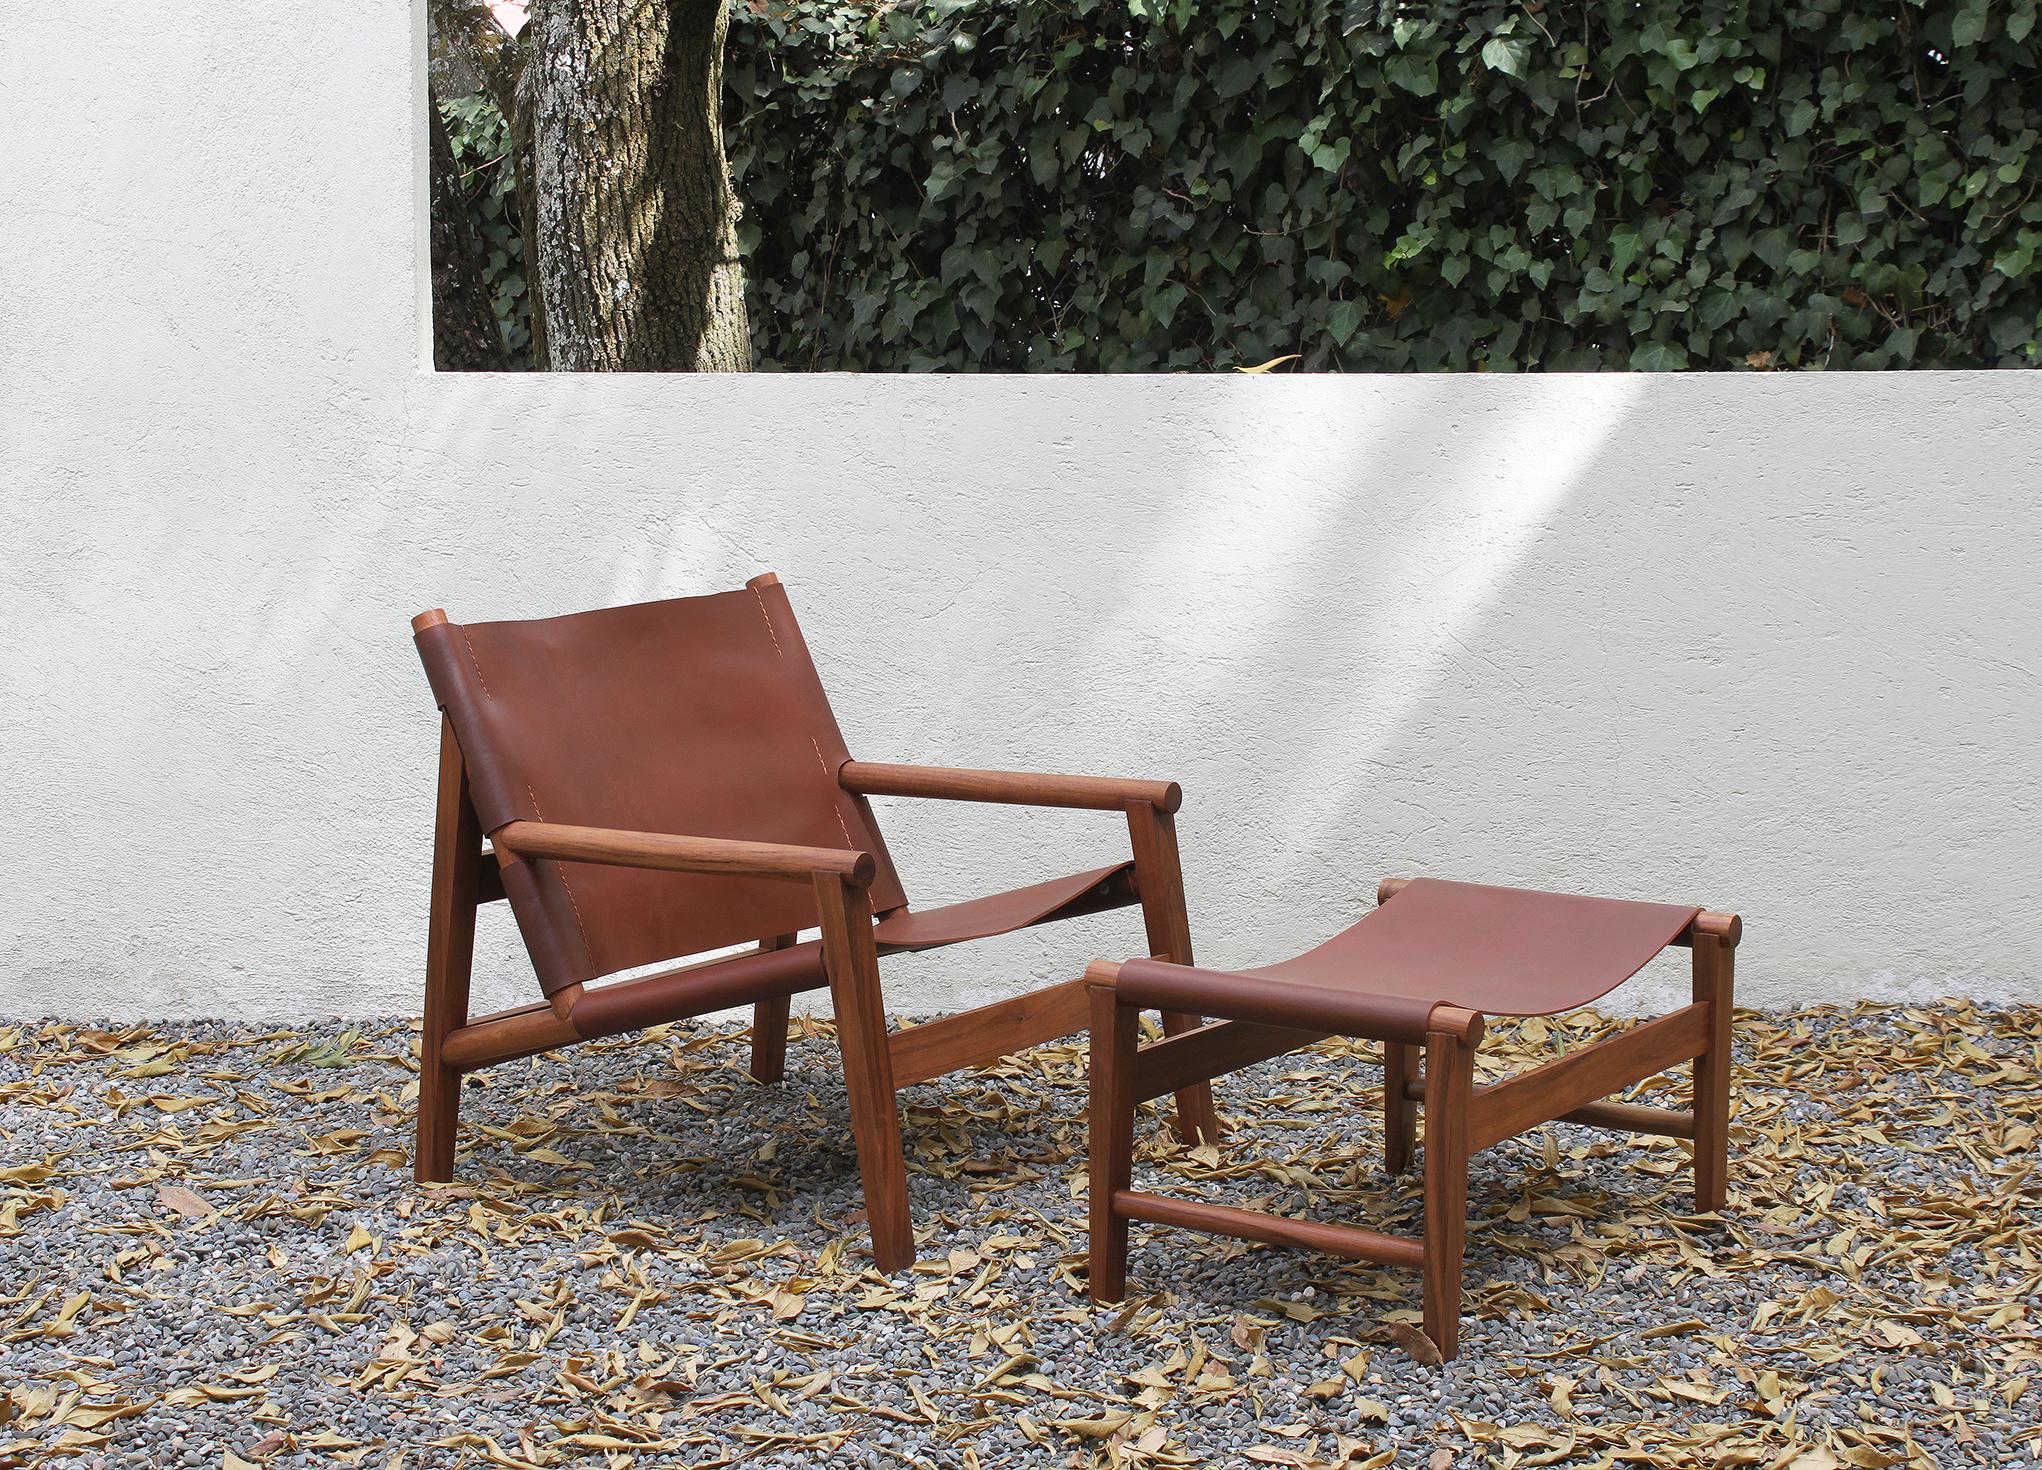 La Colima Chair, Maria Beckmann, Represented by Tuleste Factory 4